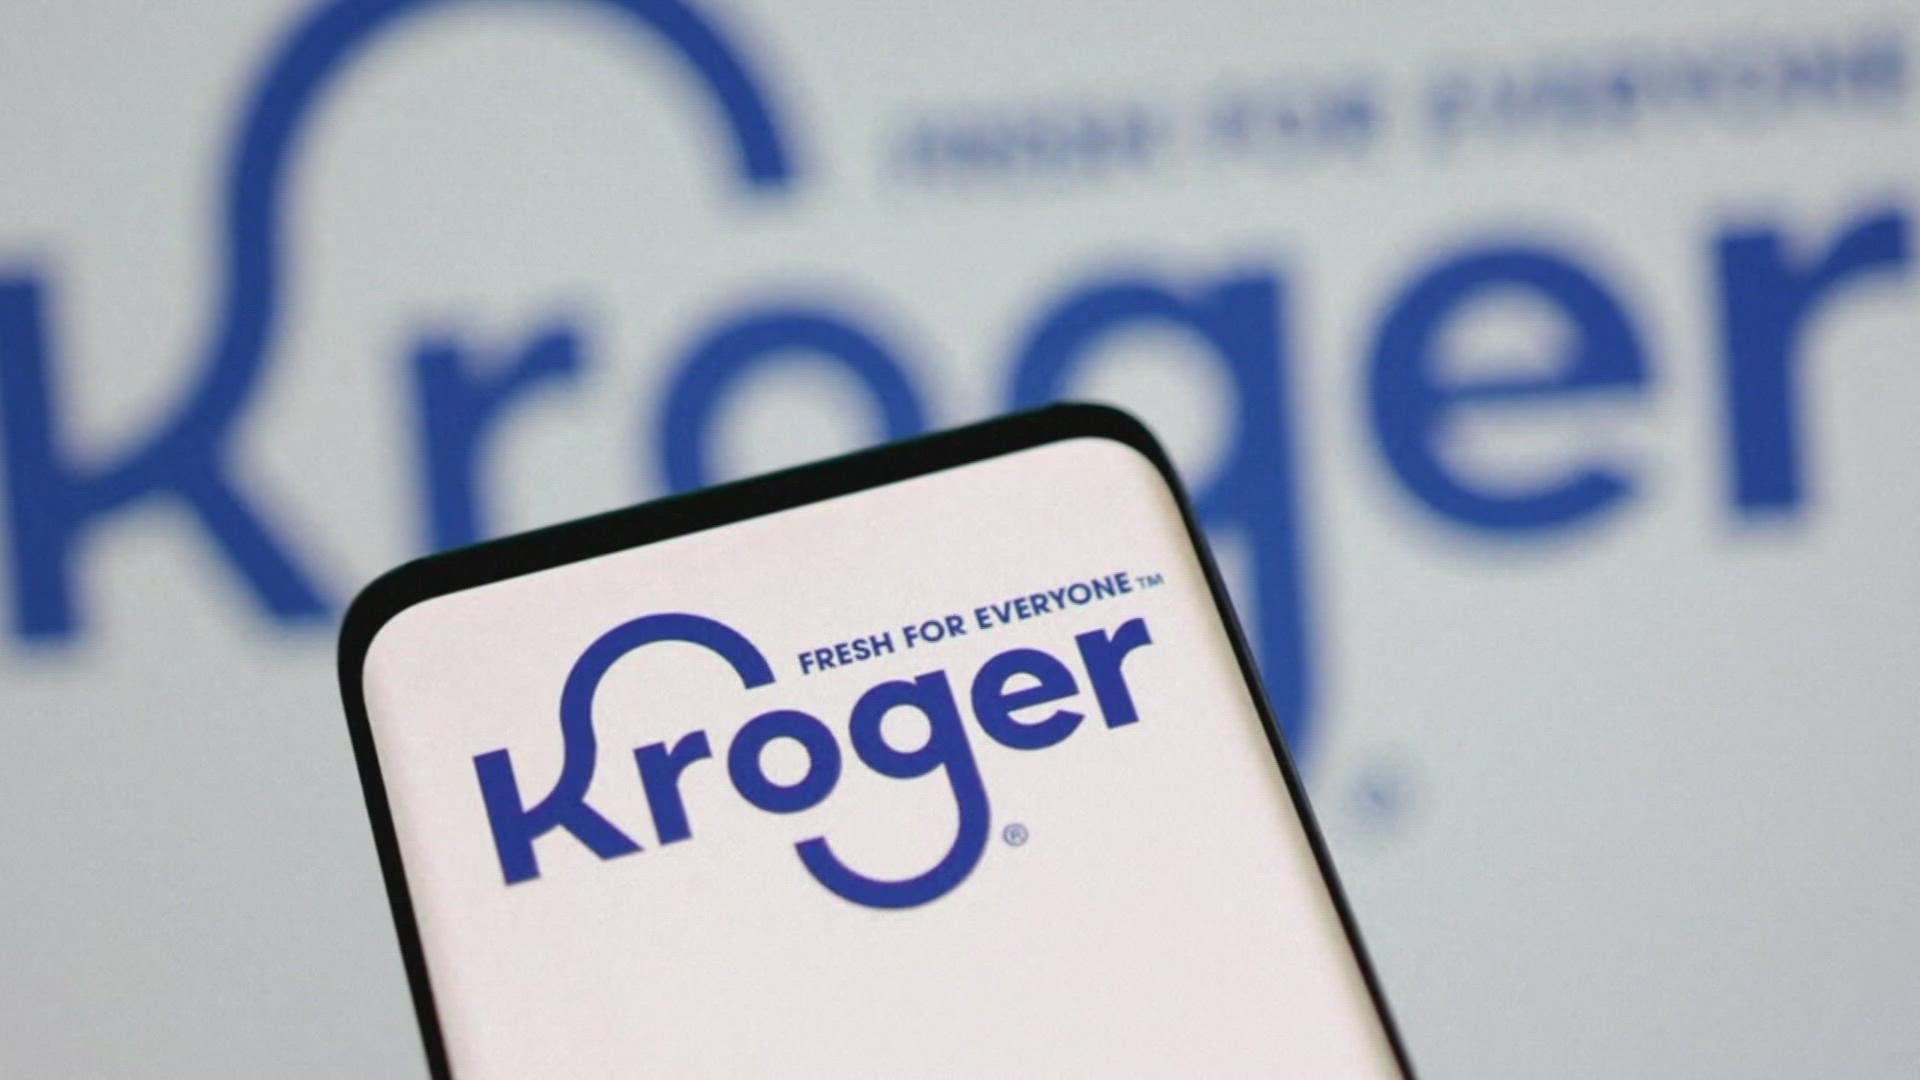 2022-2023 Proof of Benefits: Kroger by Jefferson Center - Issuu